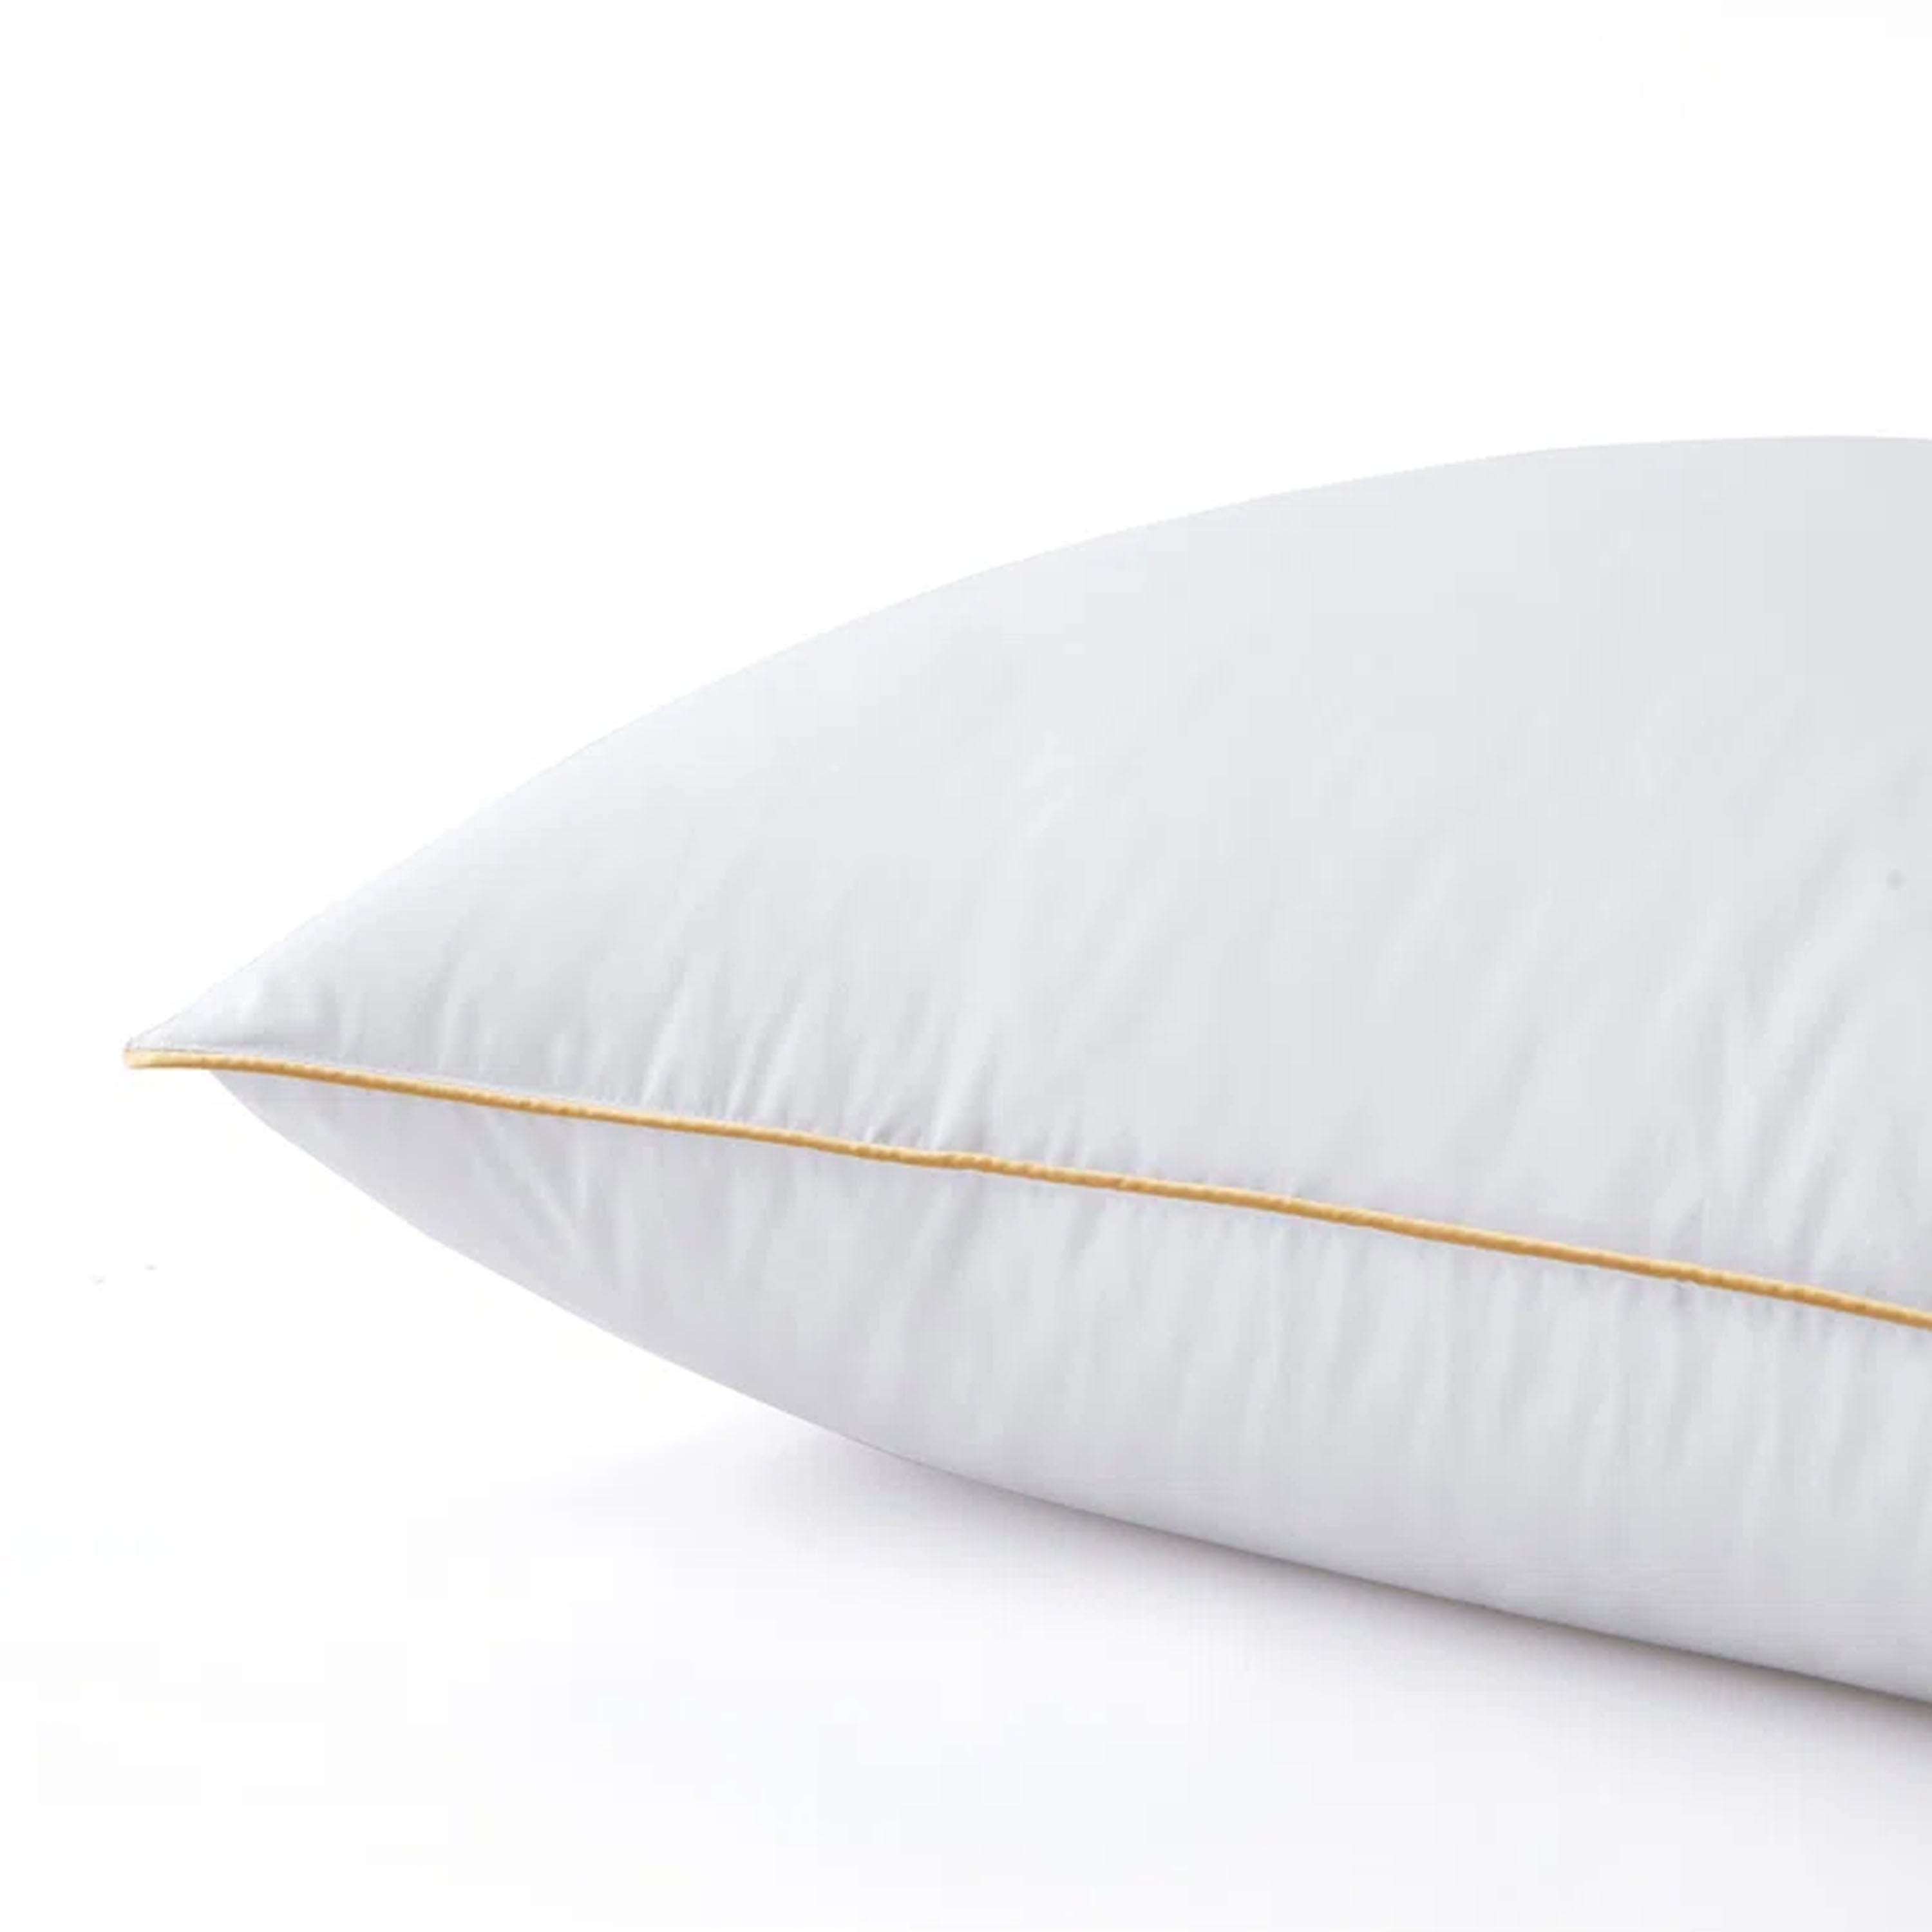 Cotton Home Downproof Gold Cord Pillow